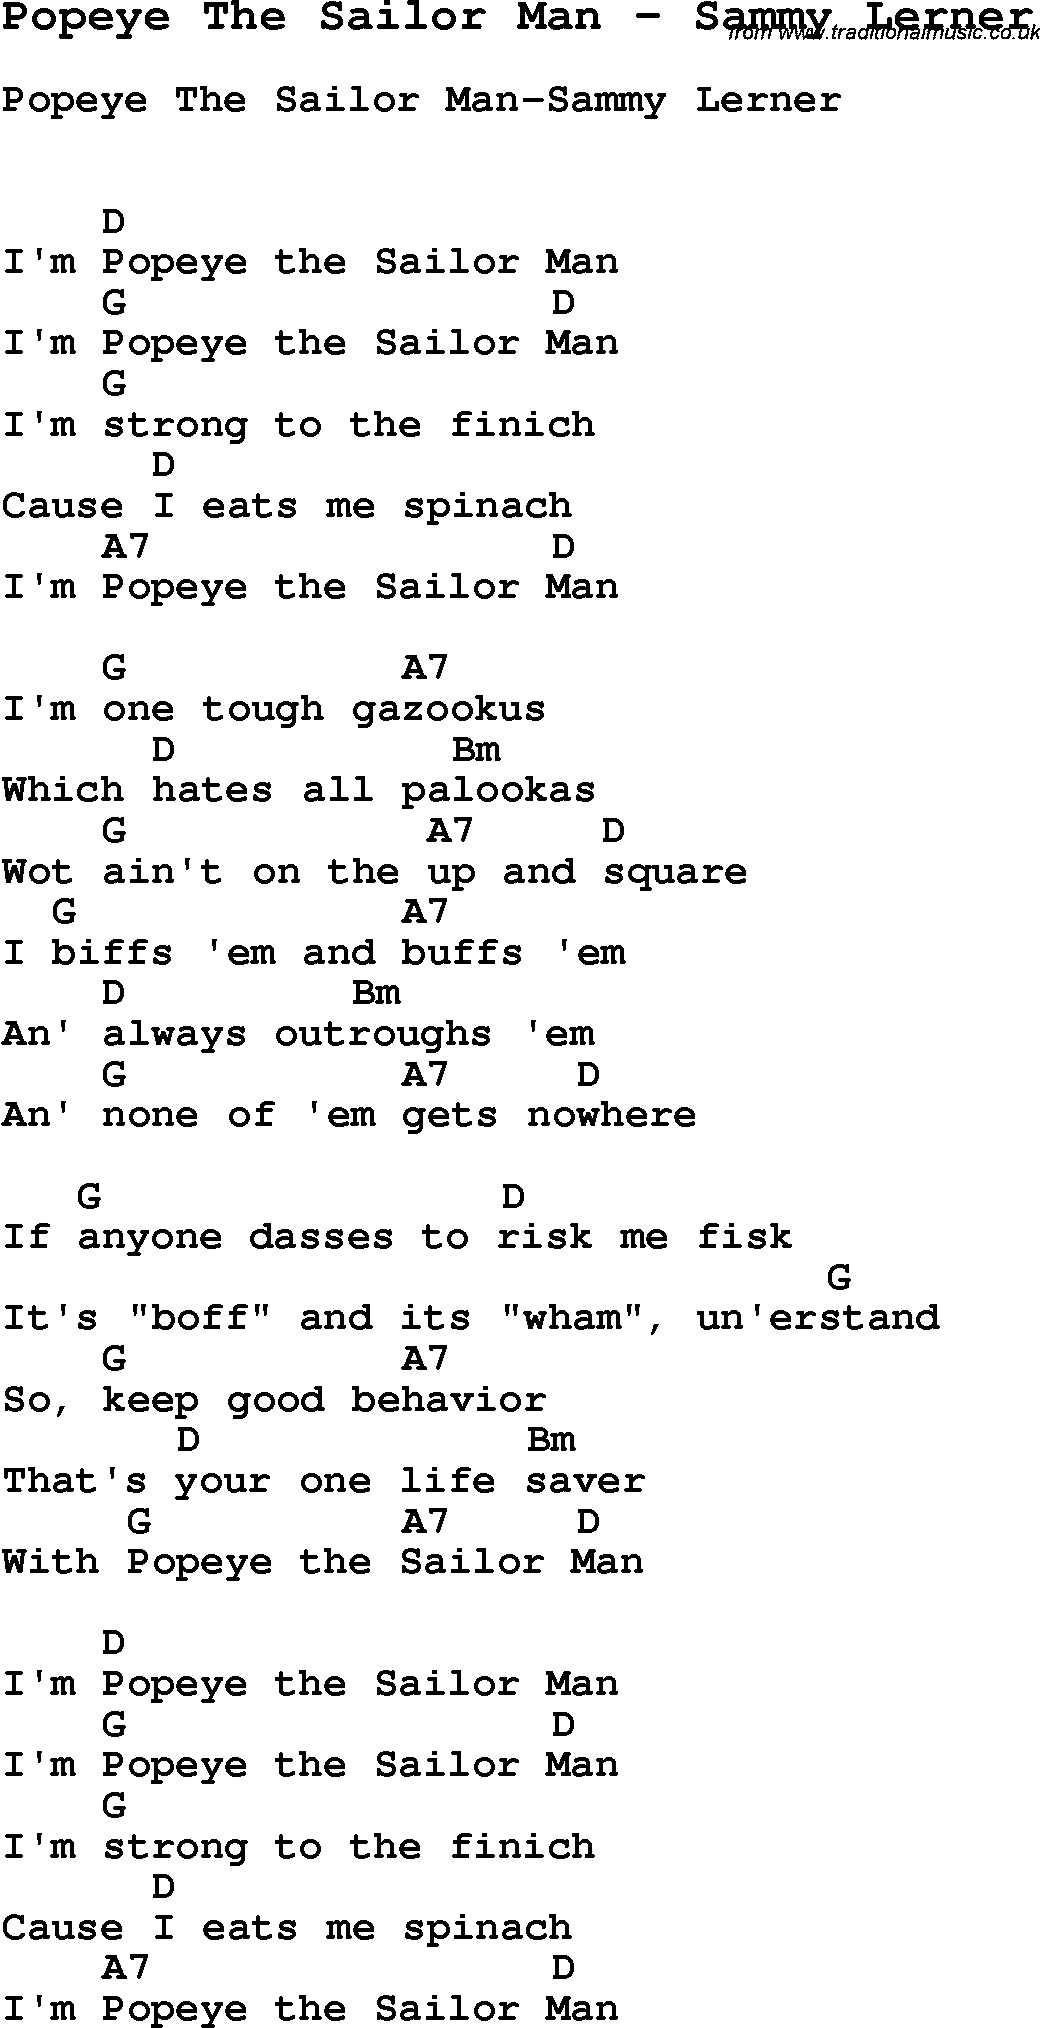 Song Popeye The Sailor Man by Sammy Lerner, with lyrics for vocal performance and accompaniment chords for Ukulele, Guitar Banjo etc.